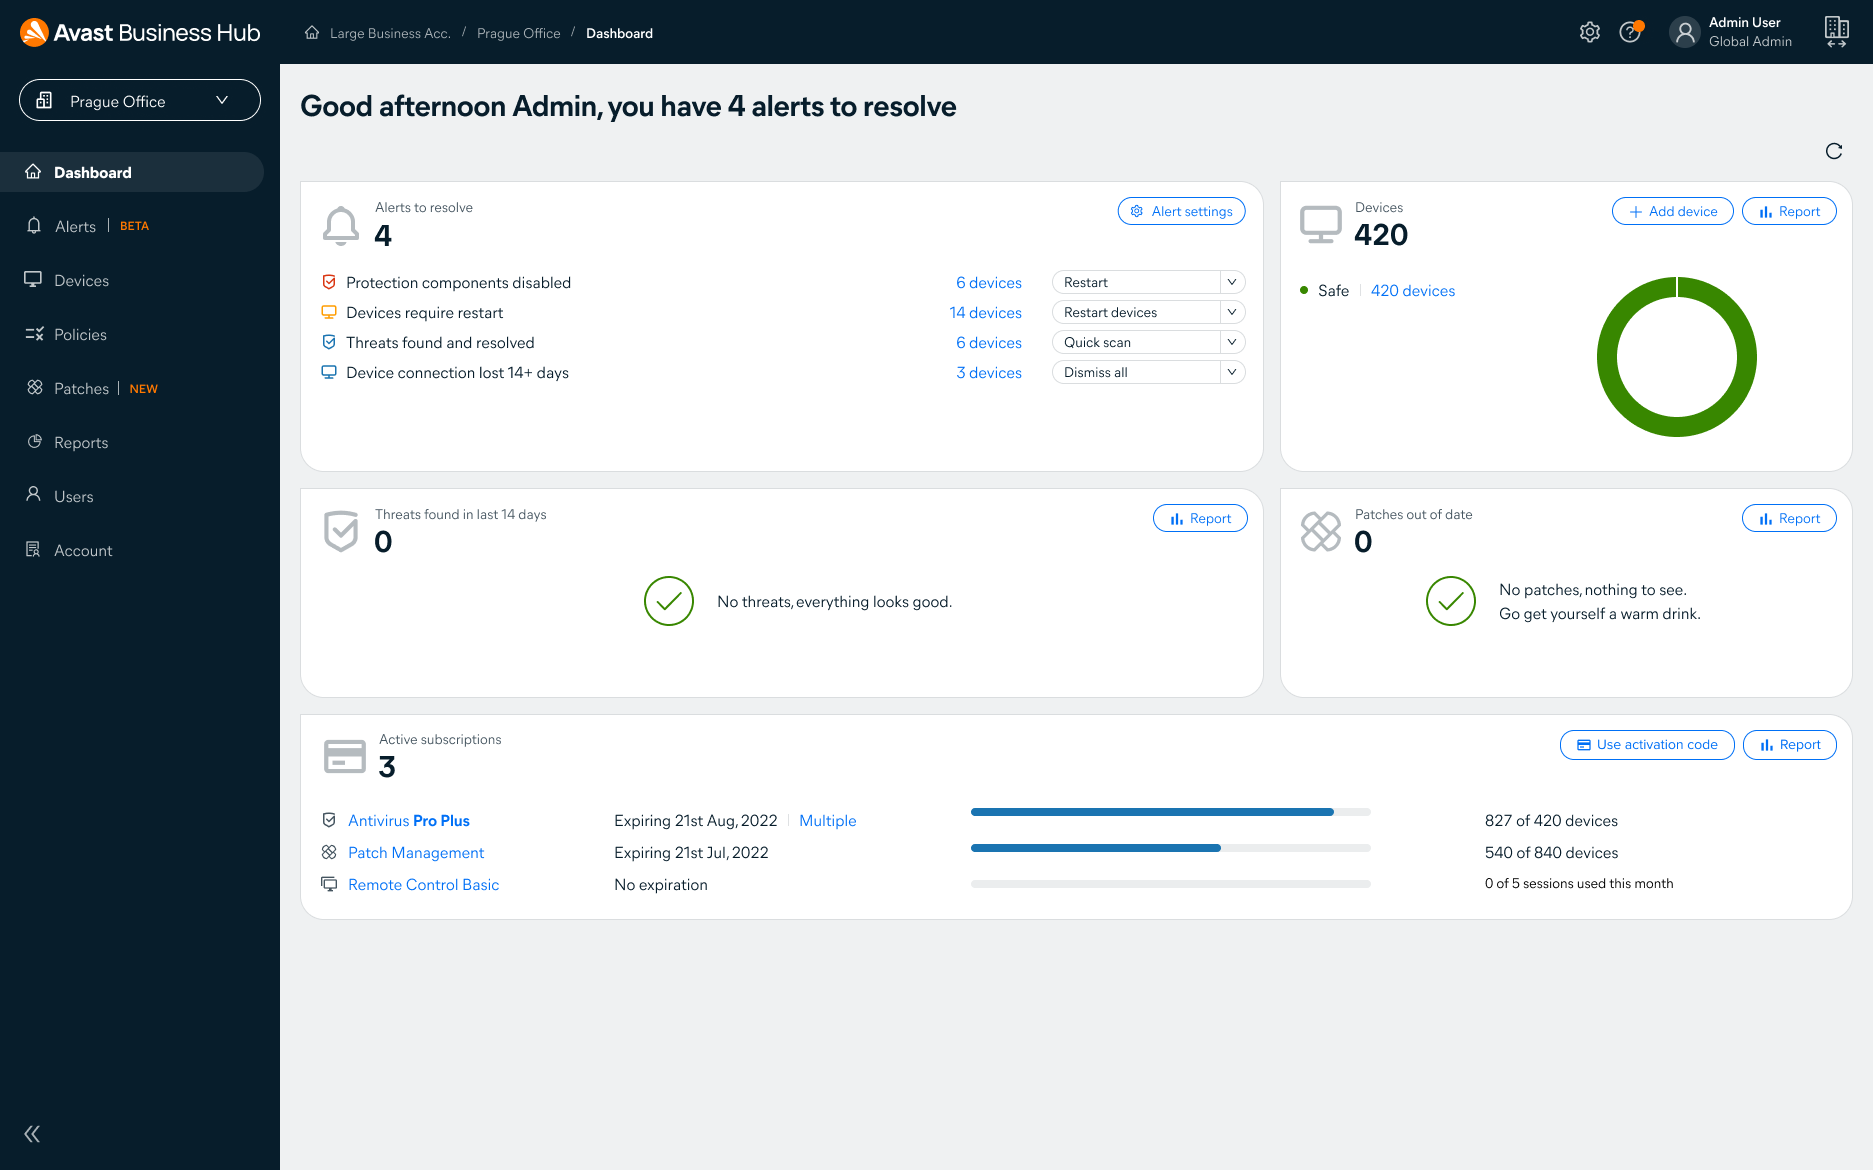 Easily manage all your Avast Business security solutions from one streamlined dashboard